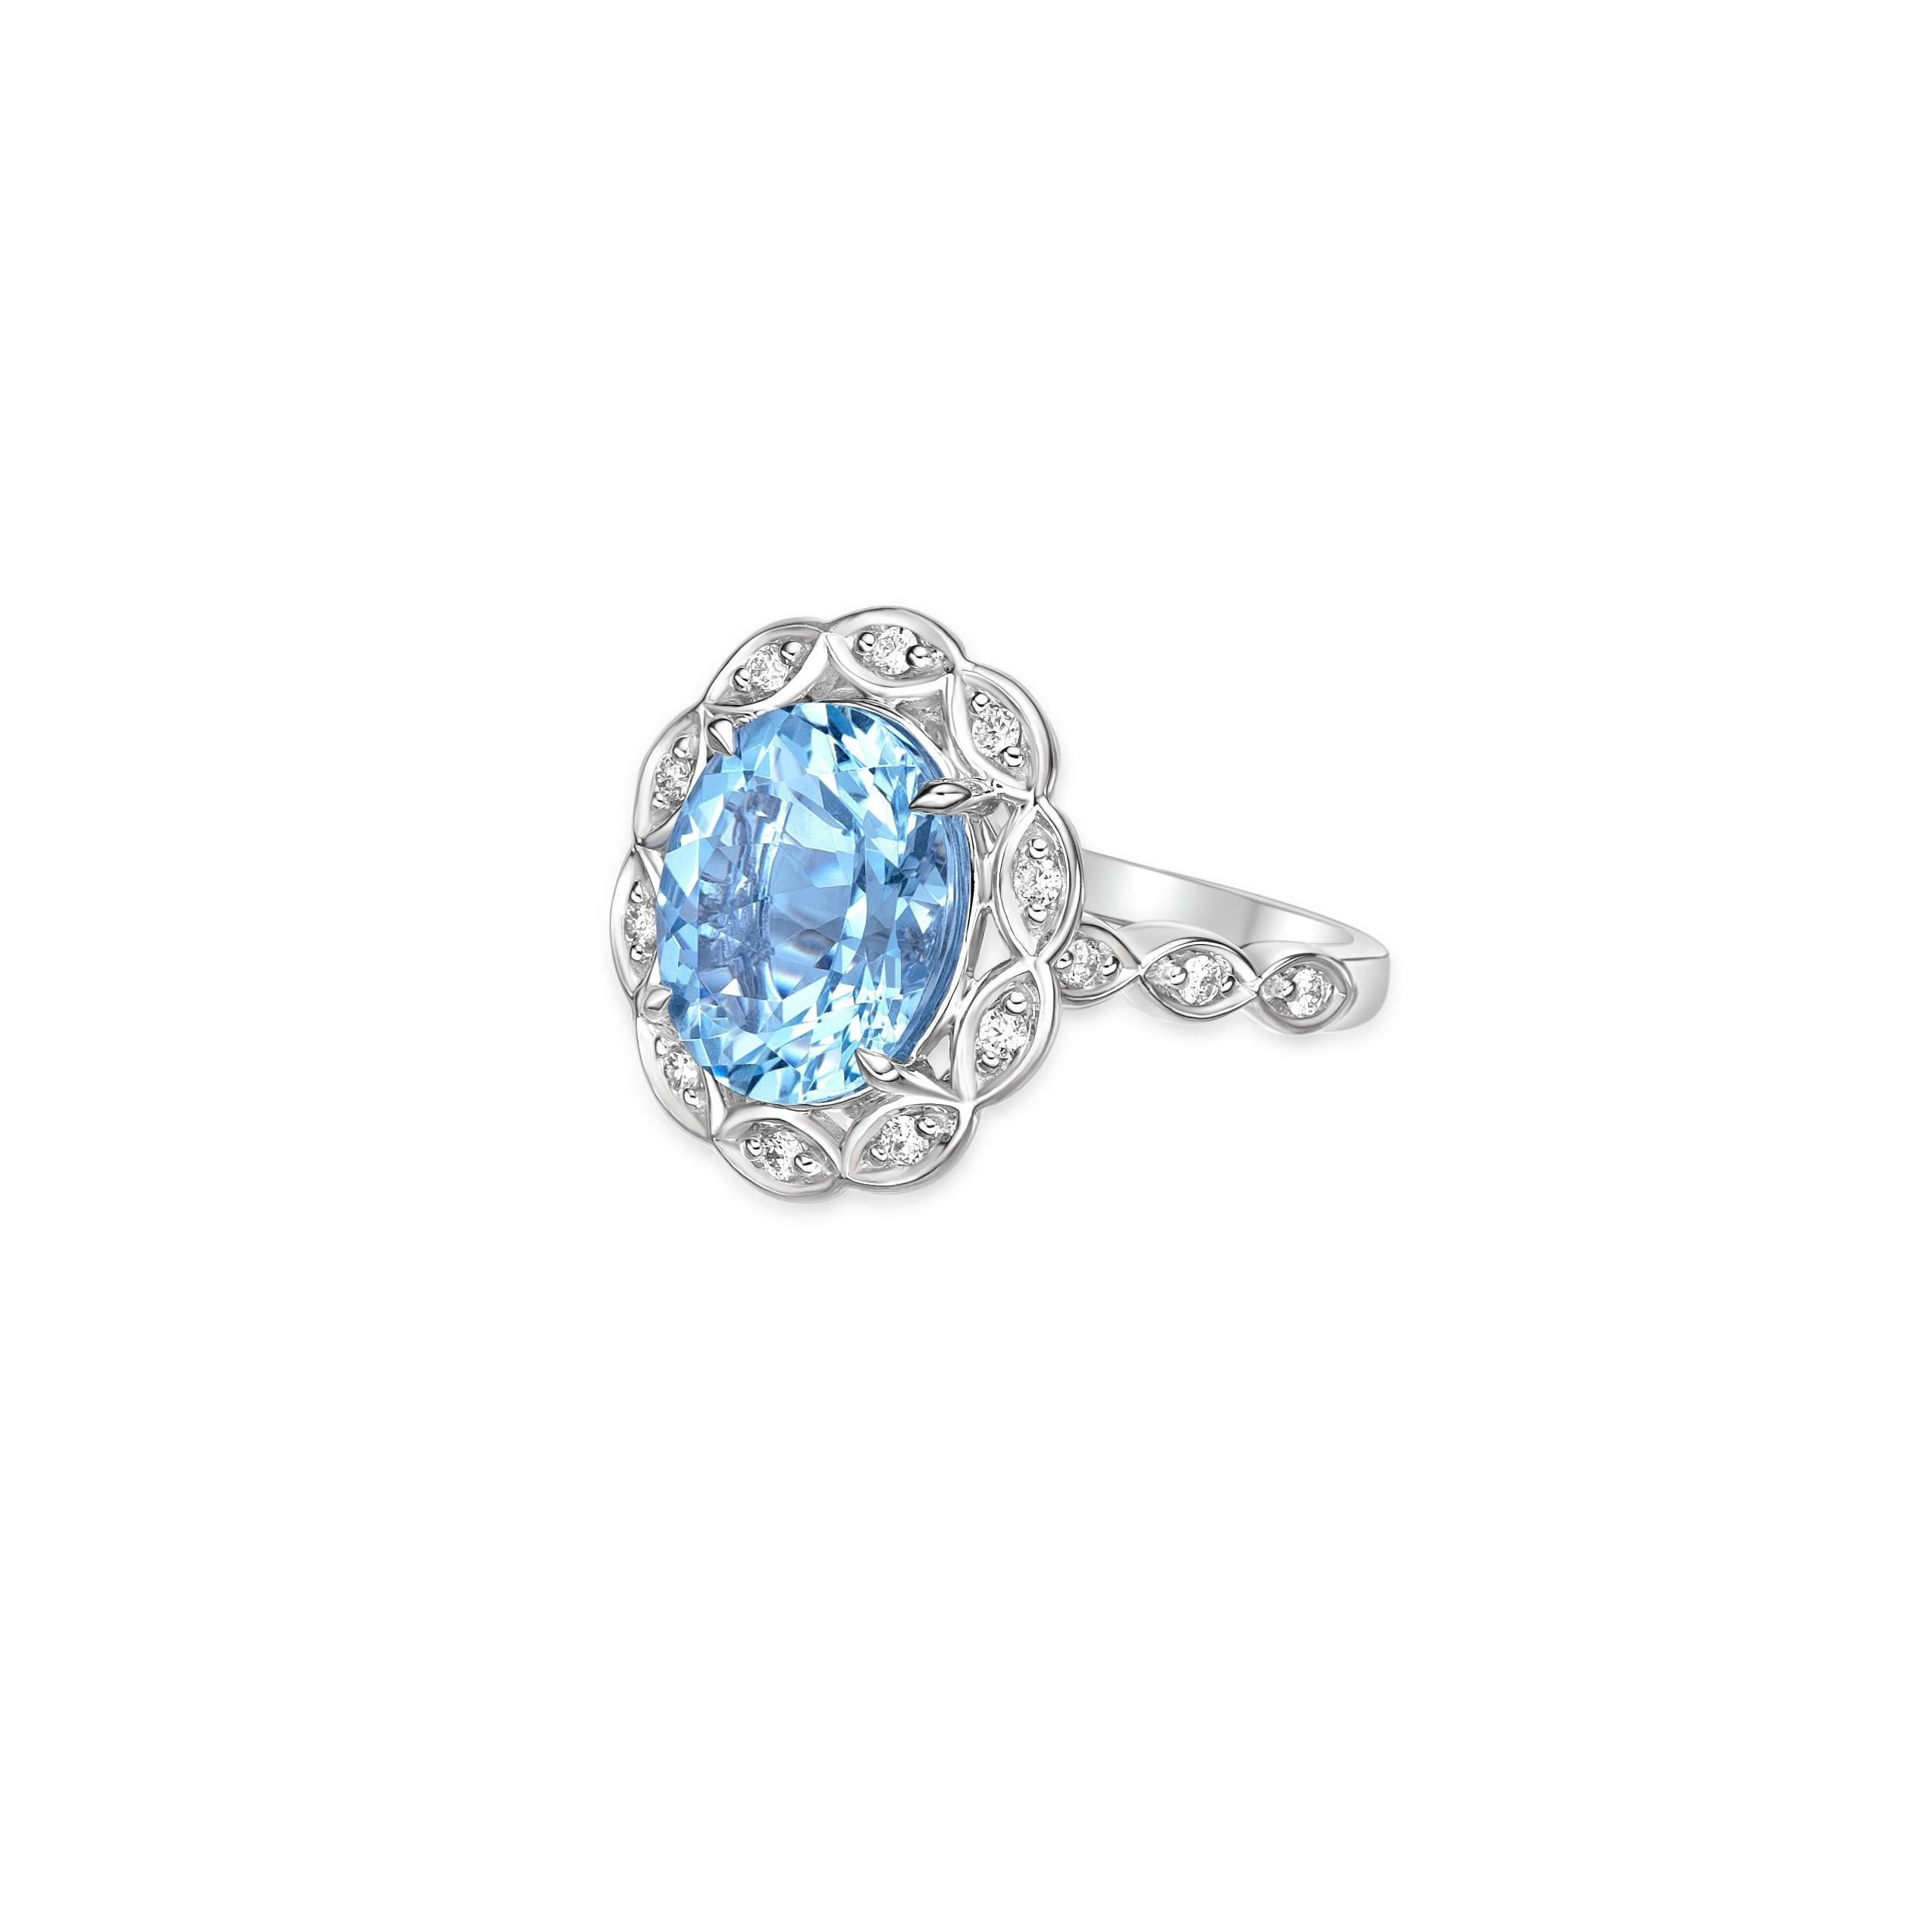 Oval Cut 4.22 Carat Aquamarine Fancy Ring in 18Karat White Gold with White Diamond. For Sale